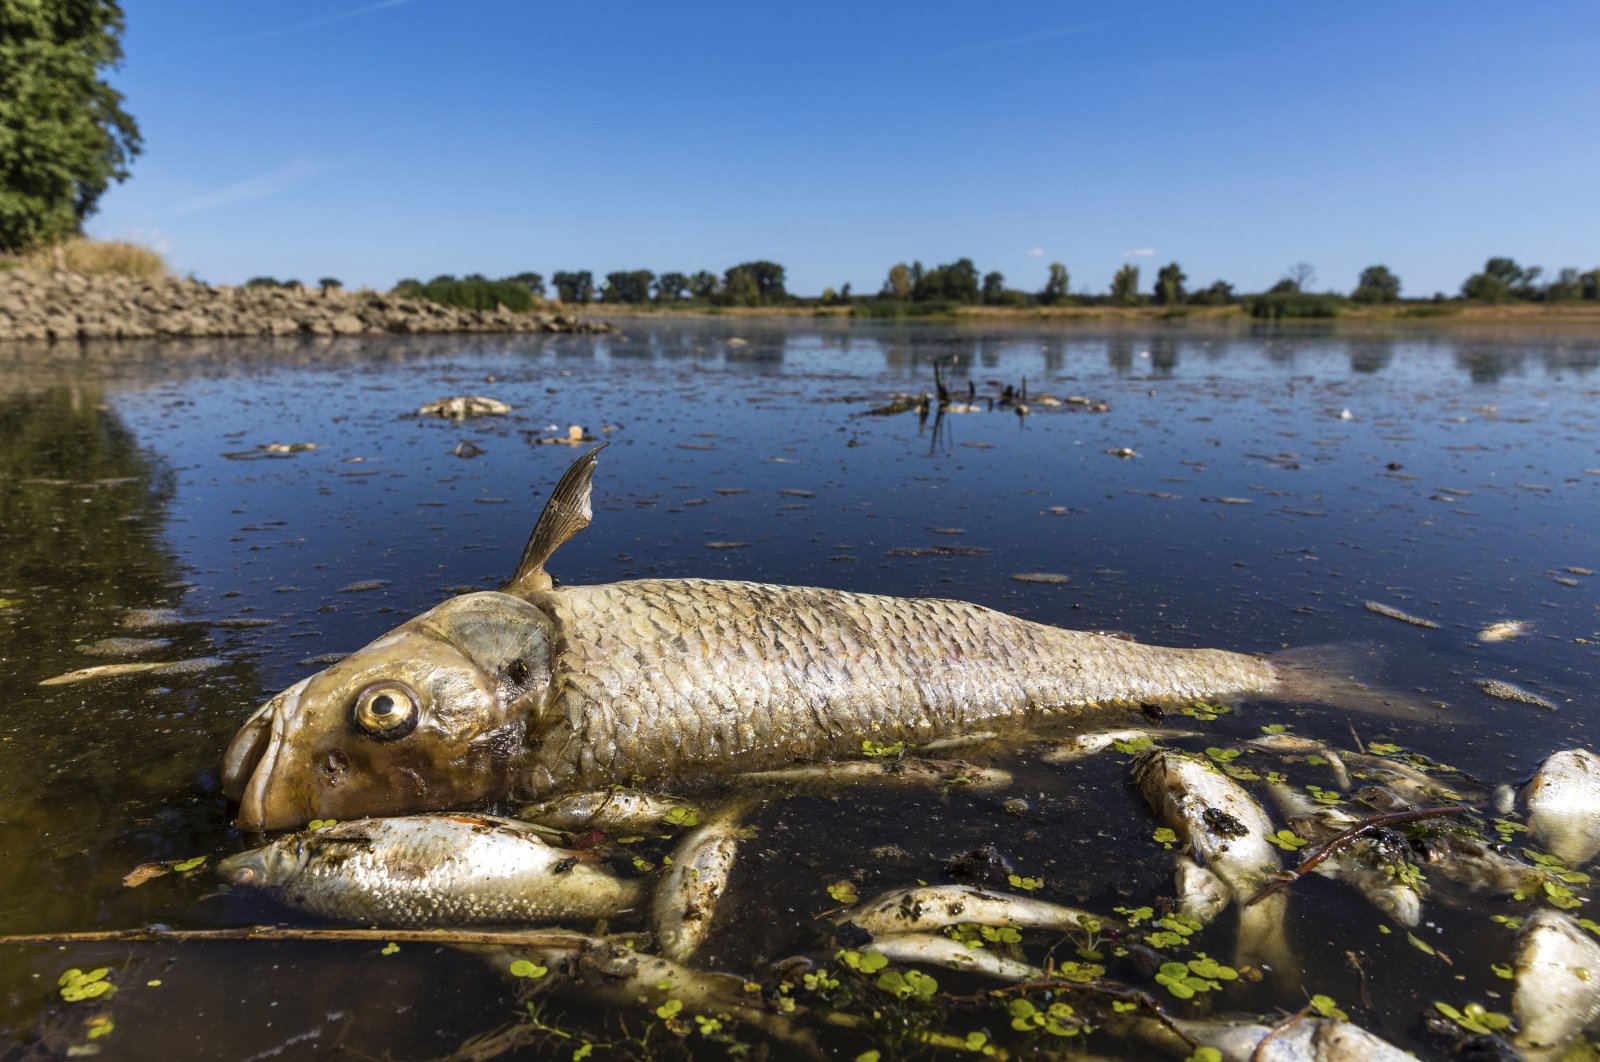 A dead chub and other dead fish float in the Oder River near Brieskow-Finkenheerd, eastern Germany, Aug. 11, 2022. Huge numbers of dead fish have washed up along the banks of the Oder River between Germany and Poland. (Frank Hammerschmidt/dpa via AP)